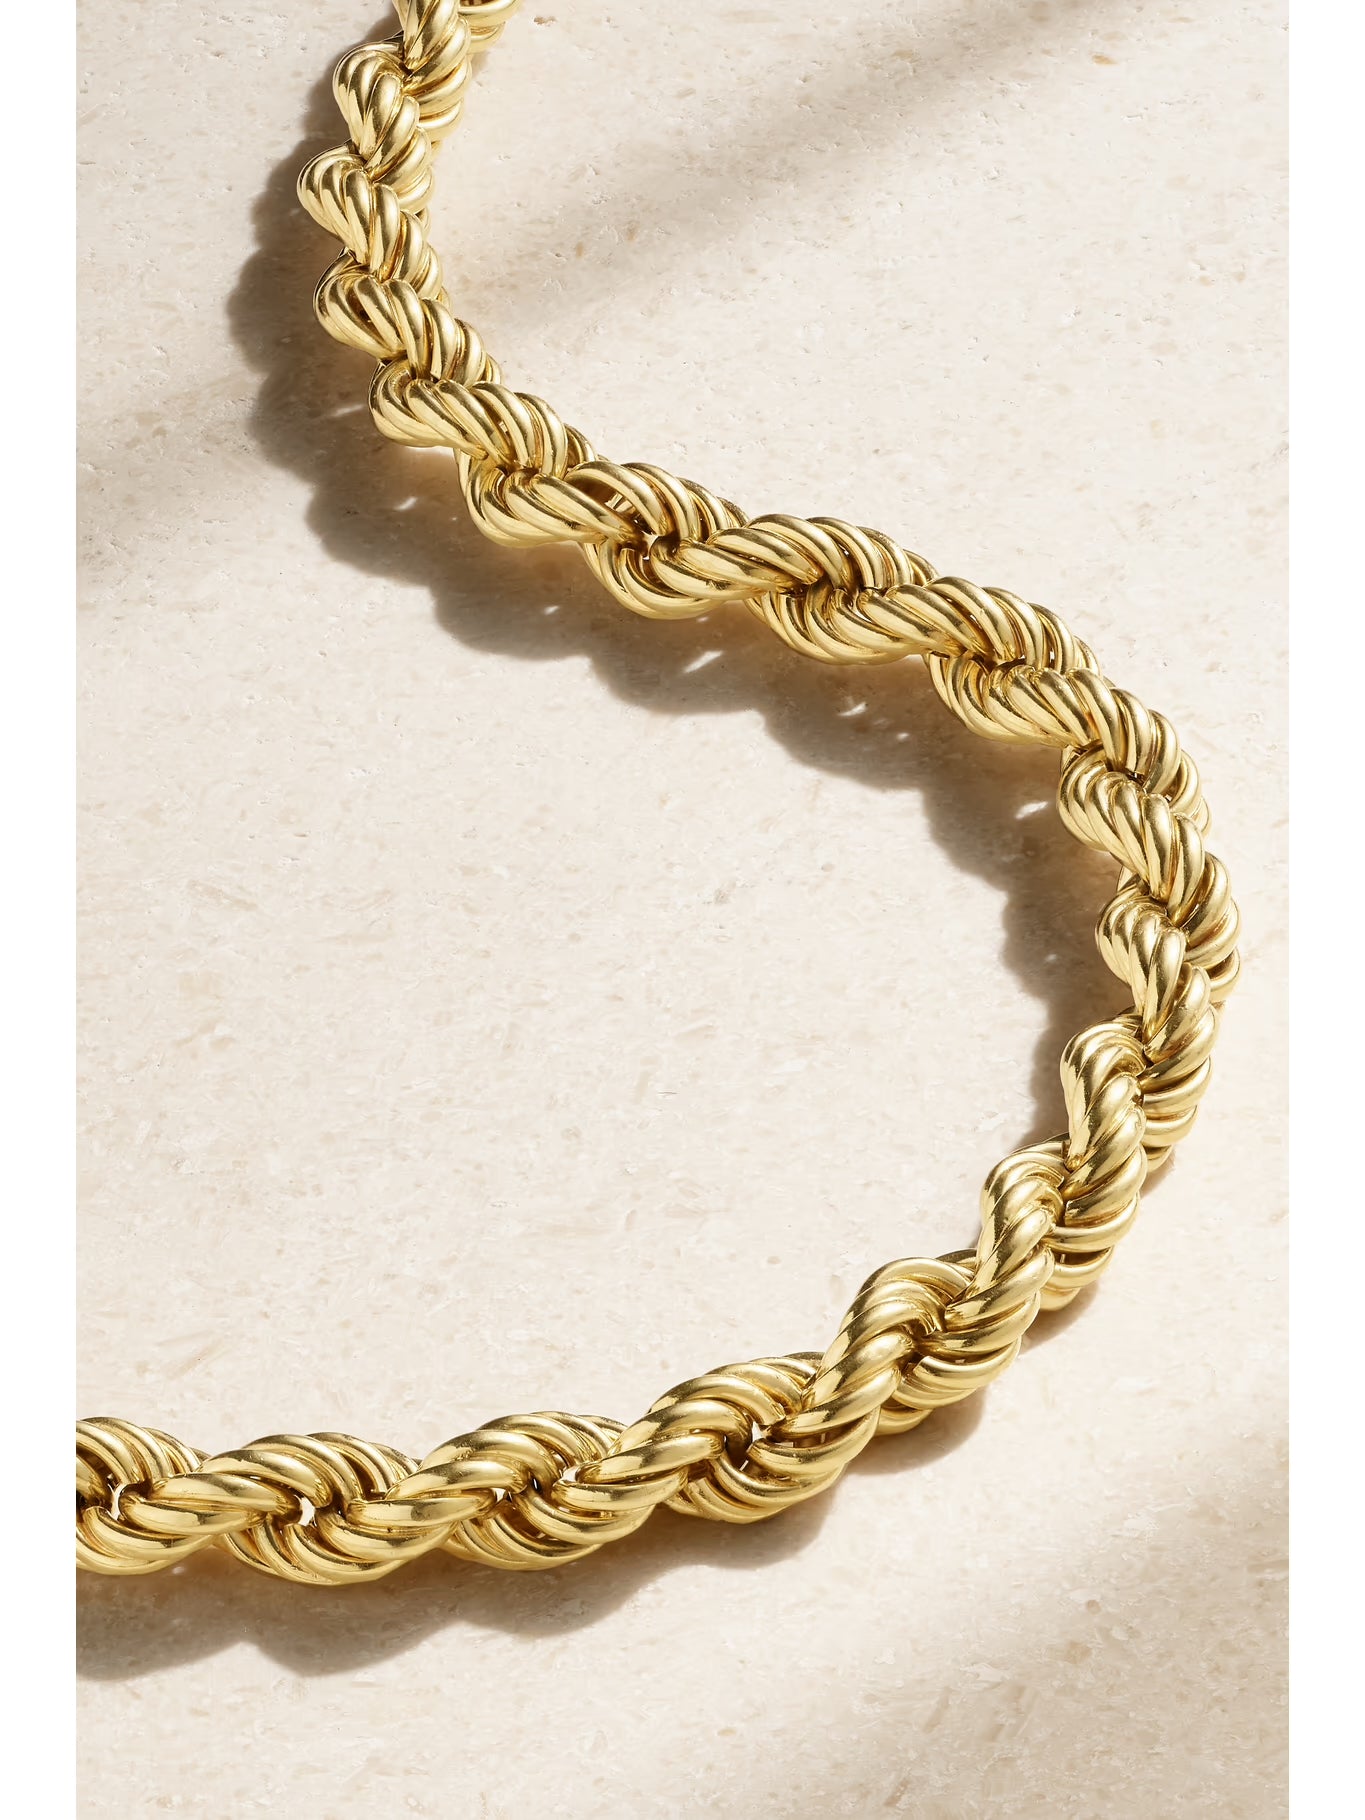 VINTAGE SOLID 18K YELLOW GOLD ROPE CHAIN c.1980s